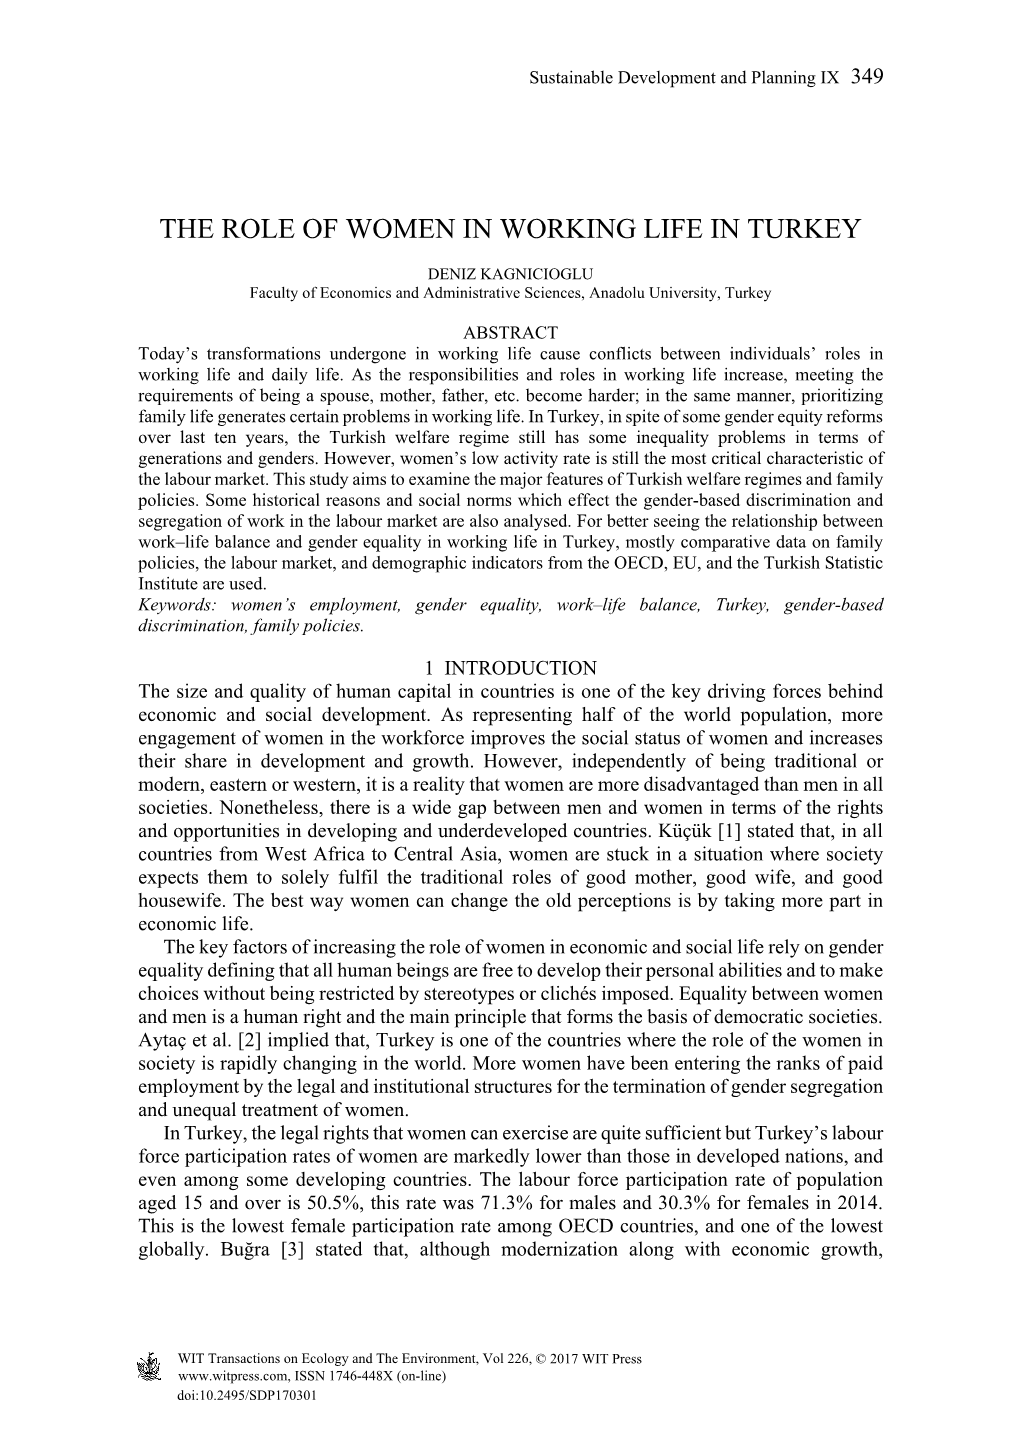 The Role of Women in Working Life in Turkey